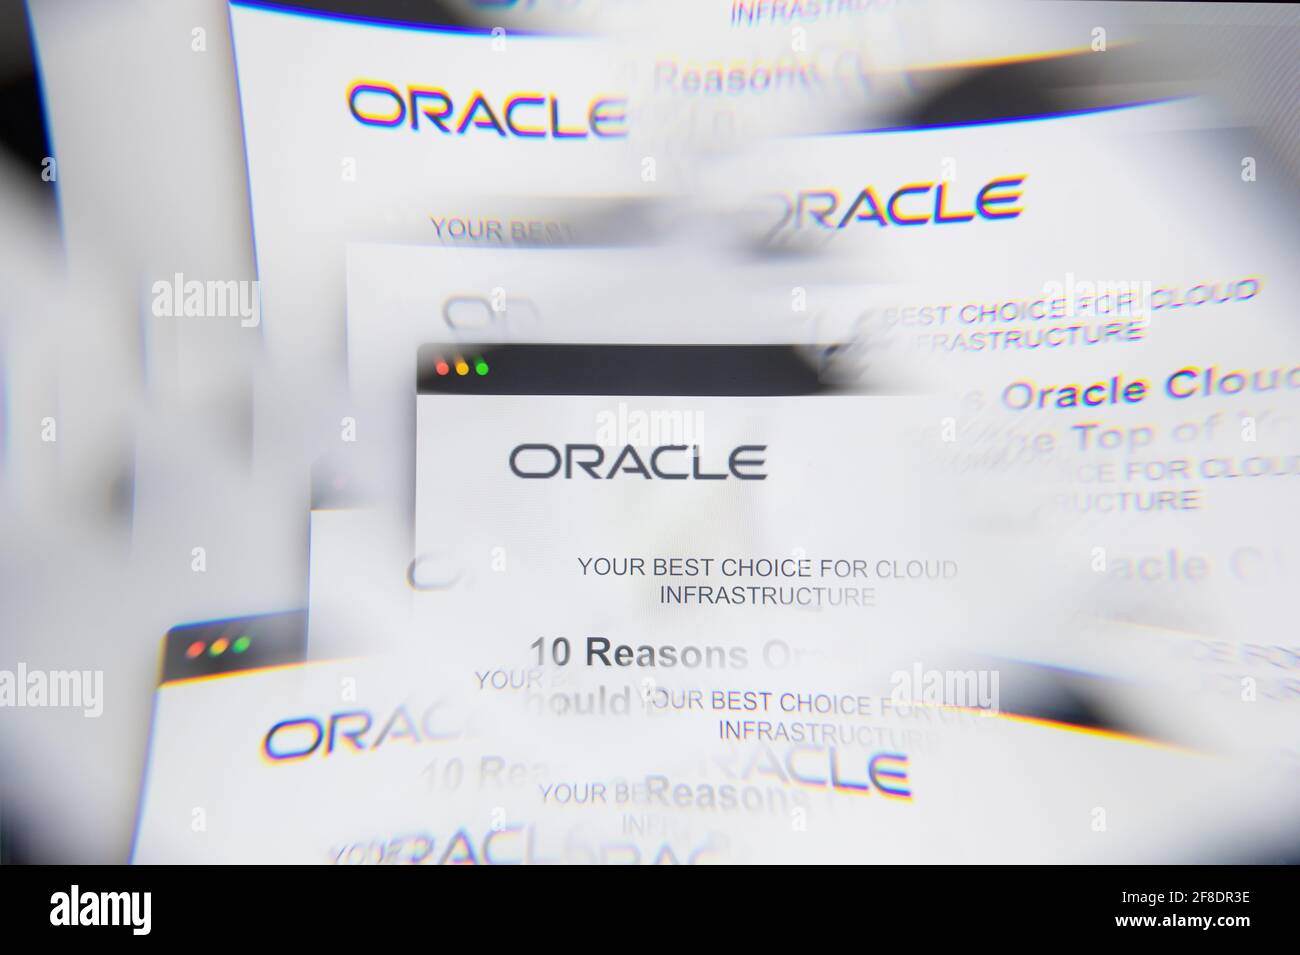 Milan, Italy - APRIL 10, 2021: Oracle service cloud logo on laptop screen seen through an optical prism. Illustrative editorial image from Oracle serv Stock Photo